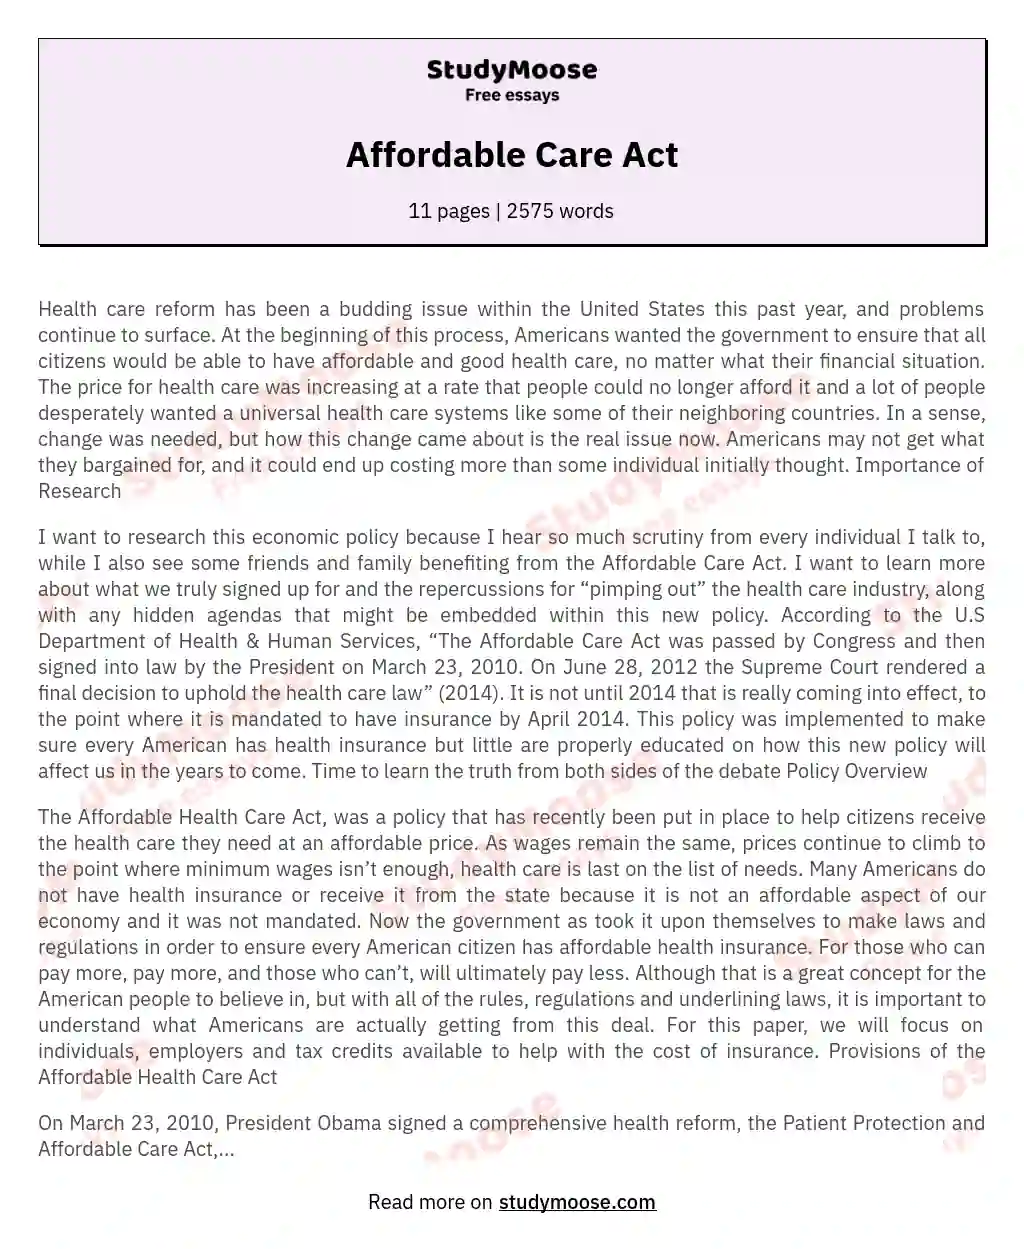 The Affordable Care Act: Impact and Implications essay